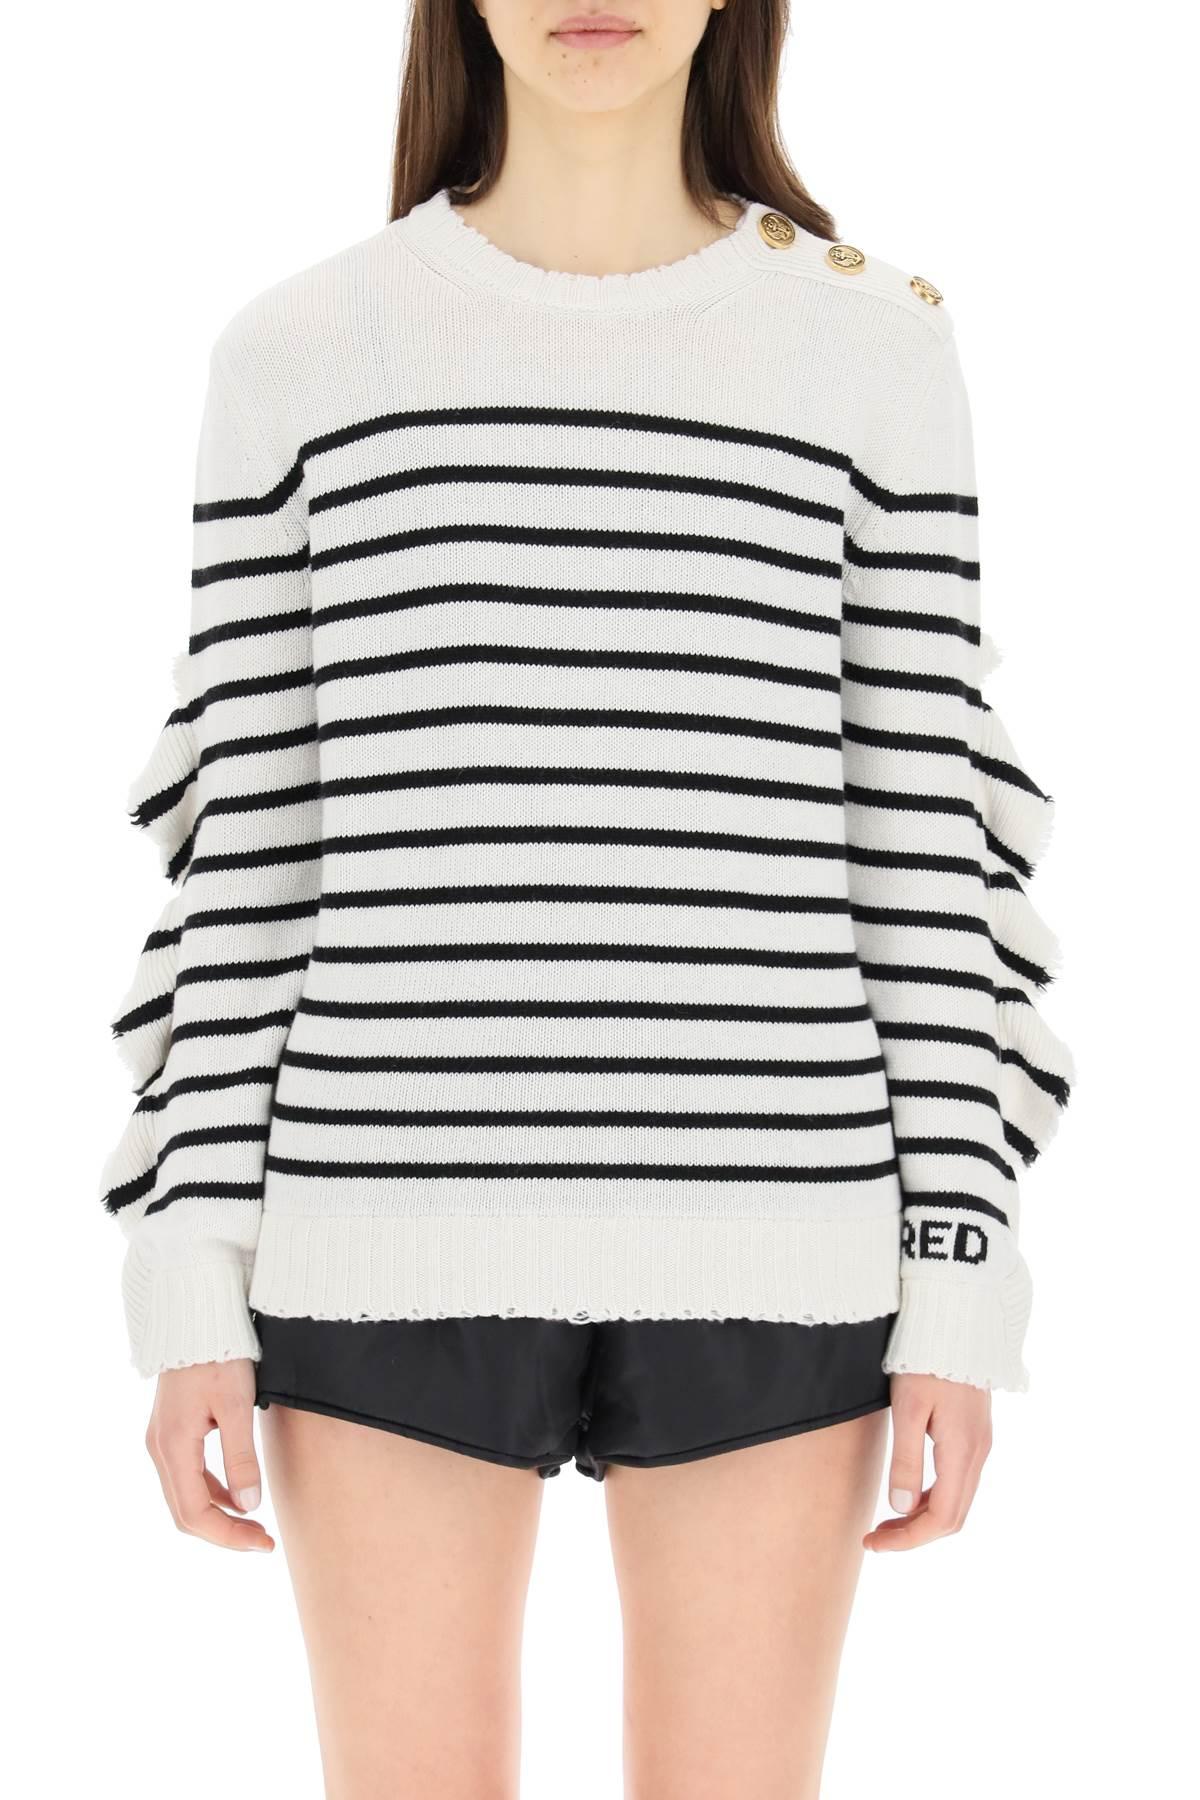 RED Valentino Wool Striped Sweater With Ruffles in Black - Lyst